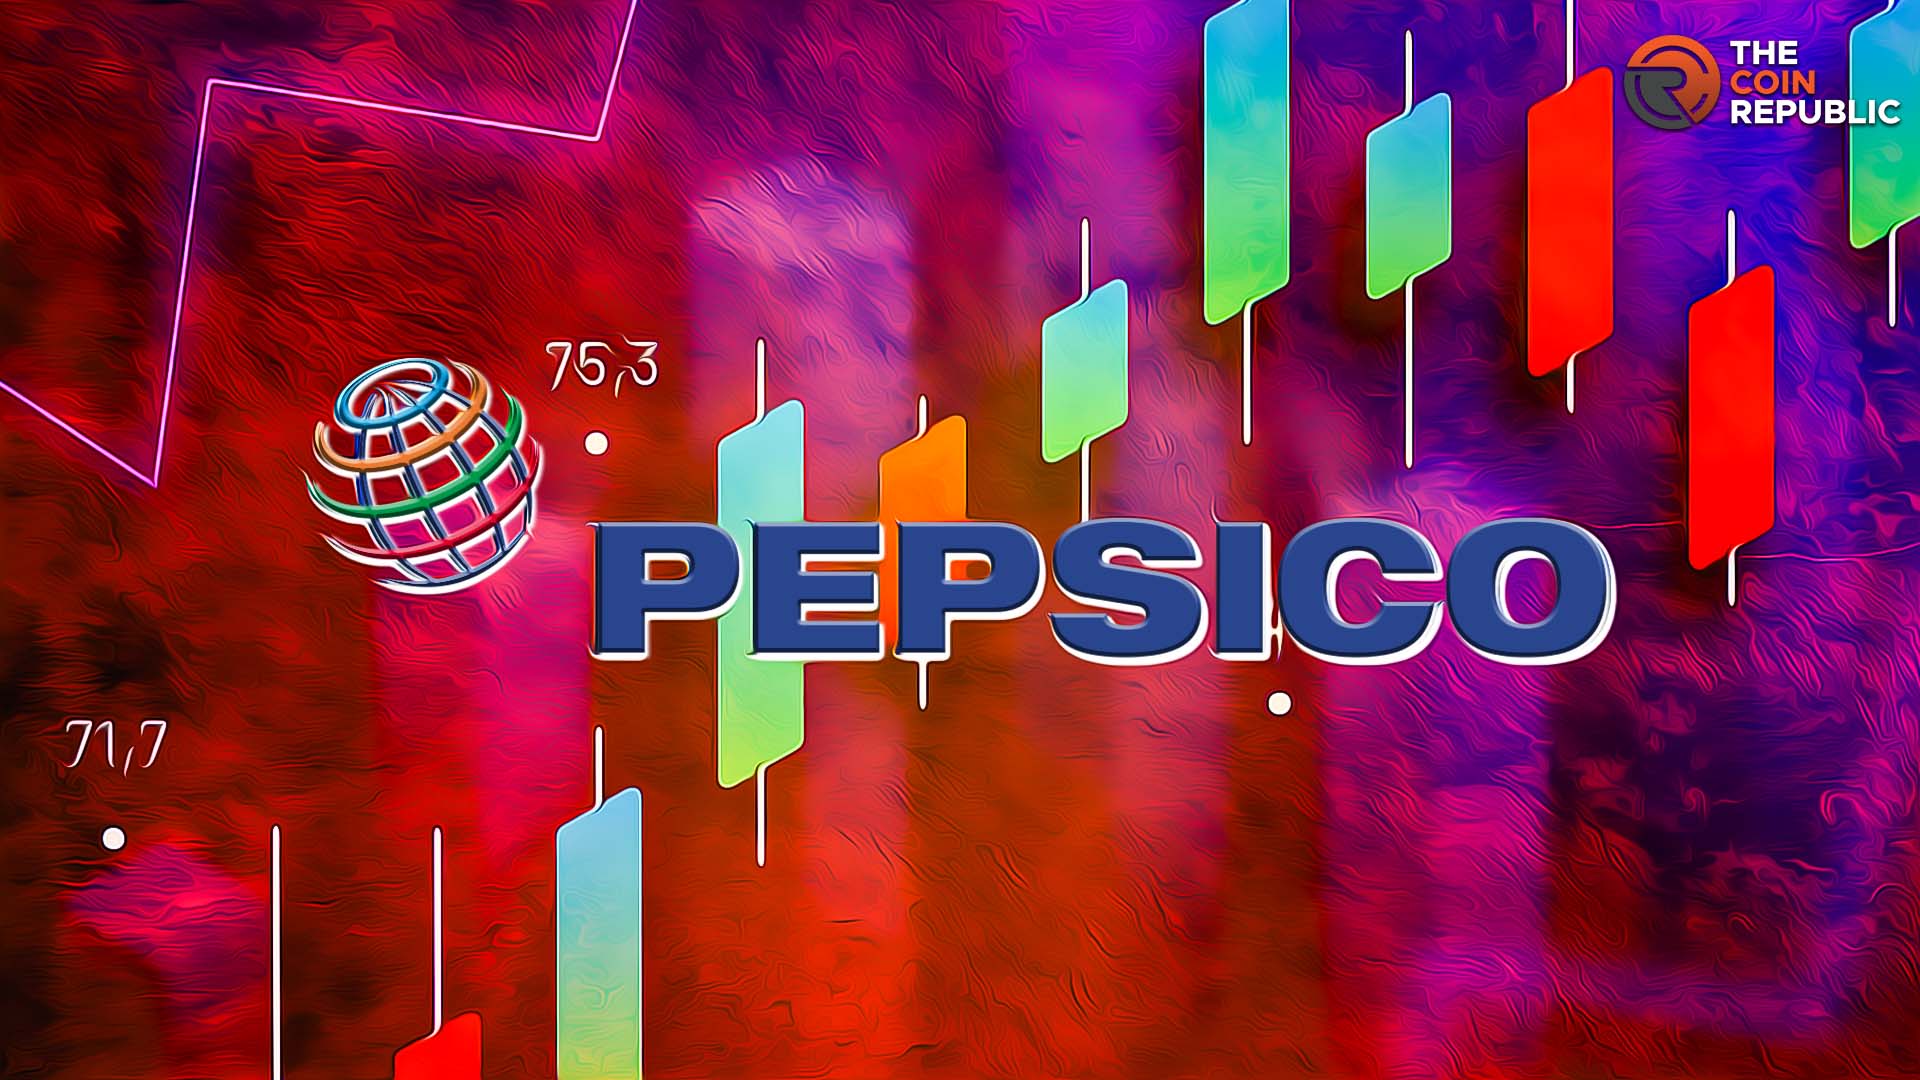 PepsiCo, INC (PEP Stock): Price Retraces Before Q2 Earning Result